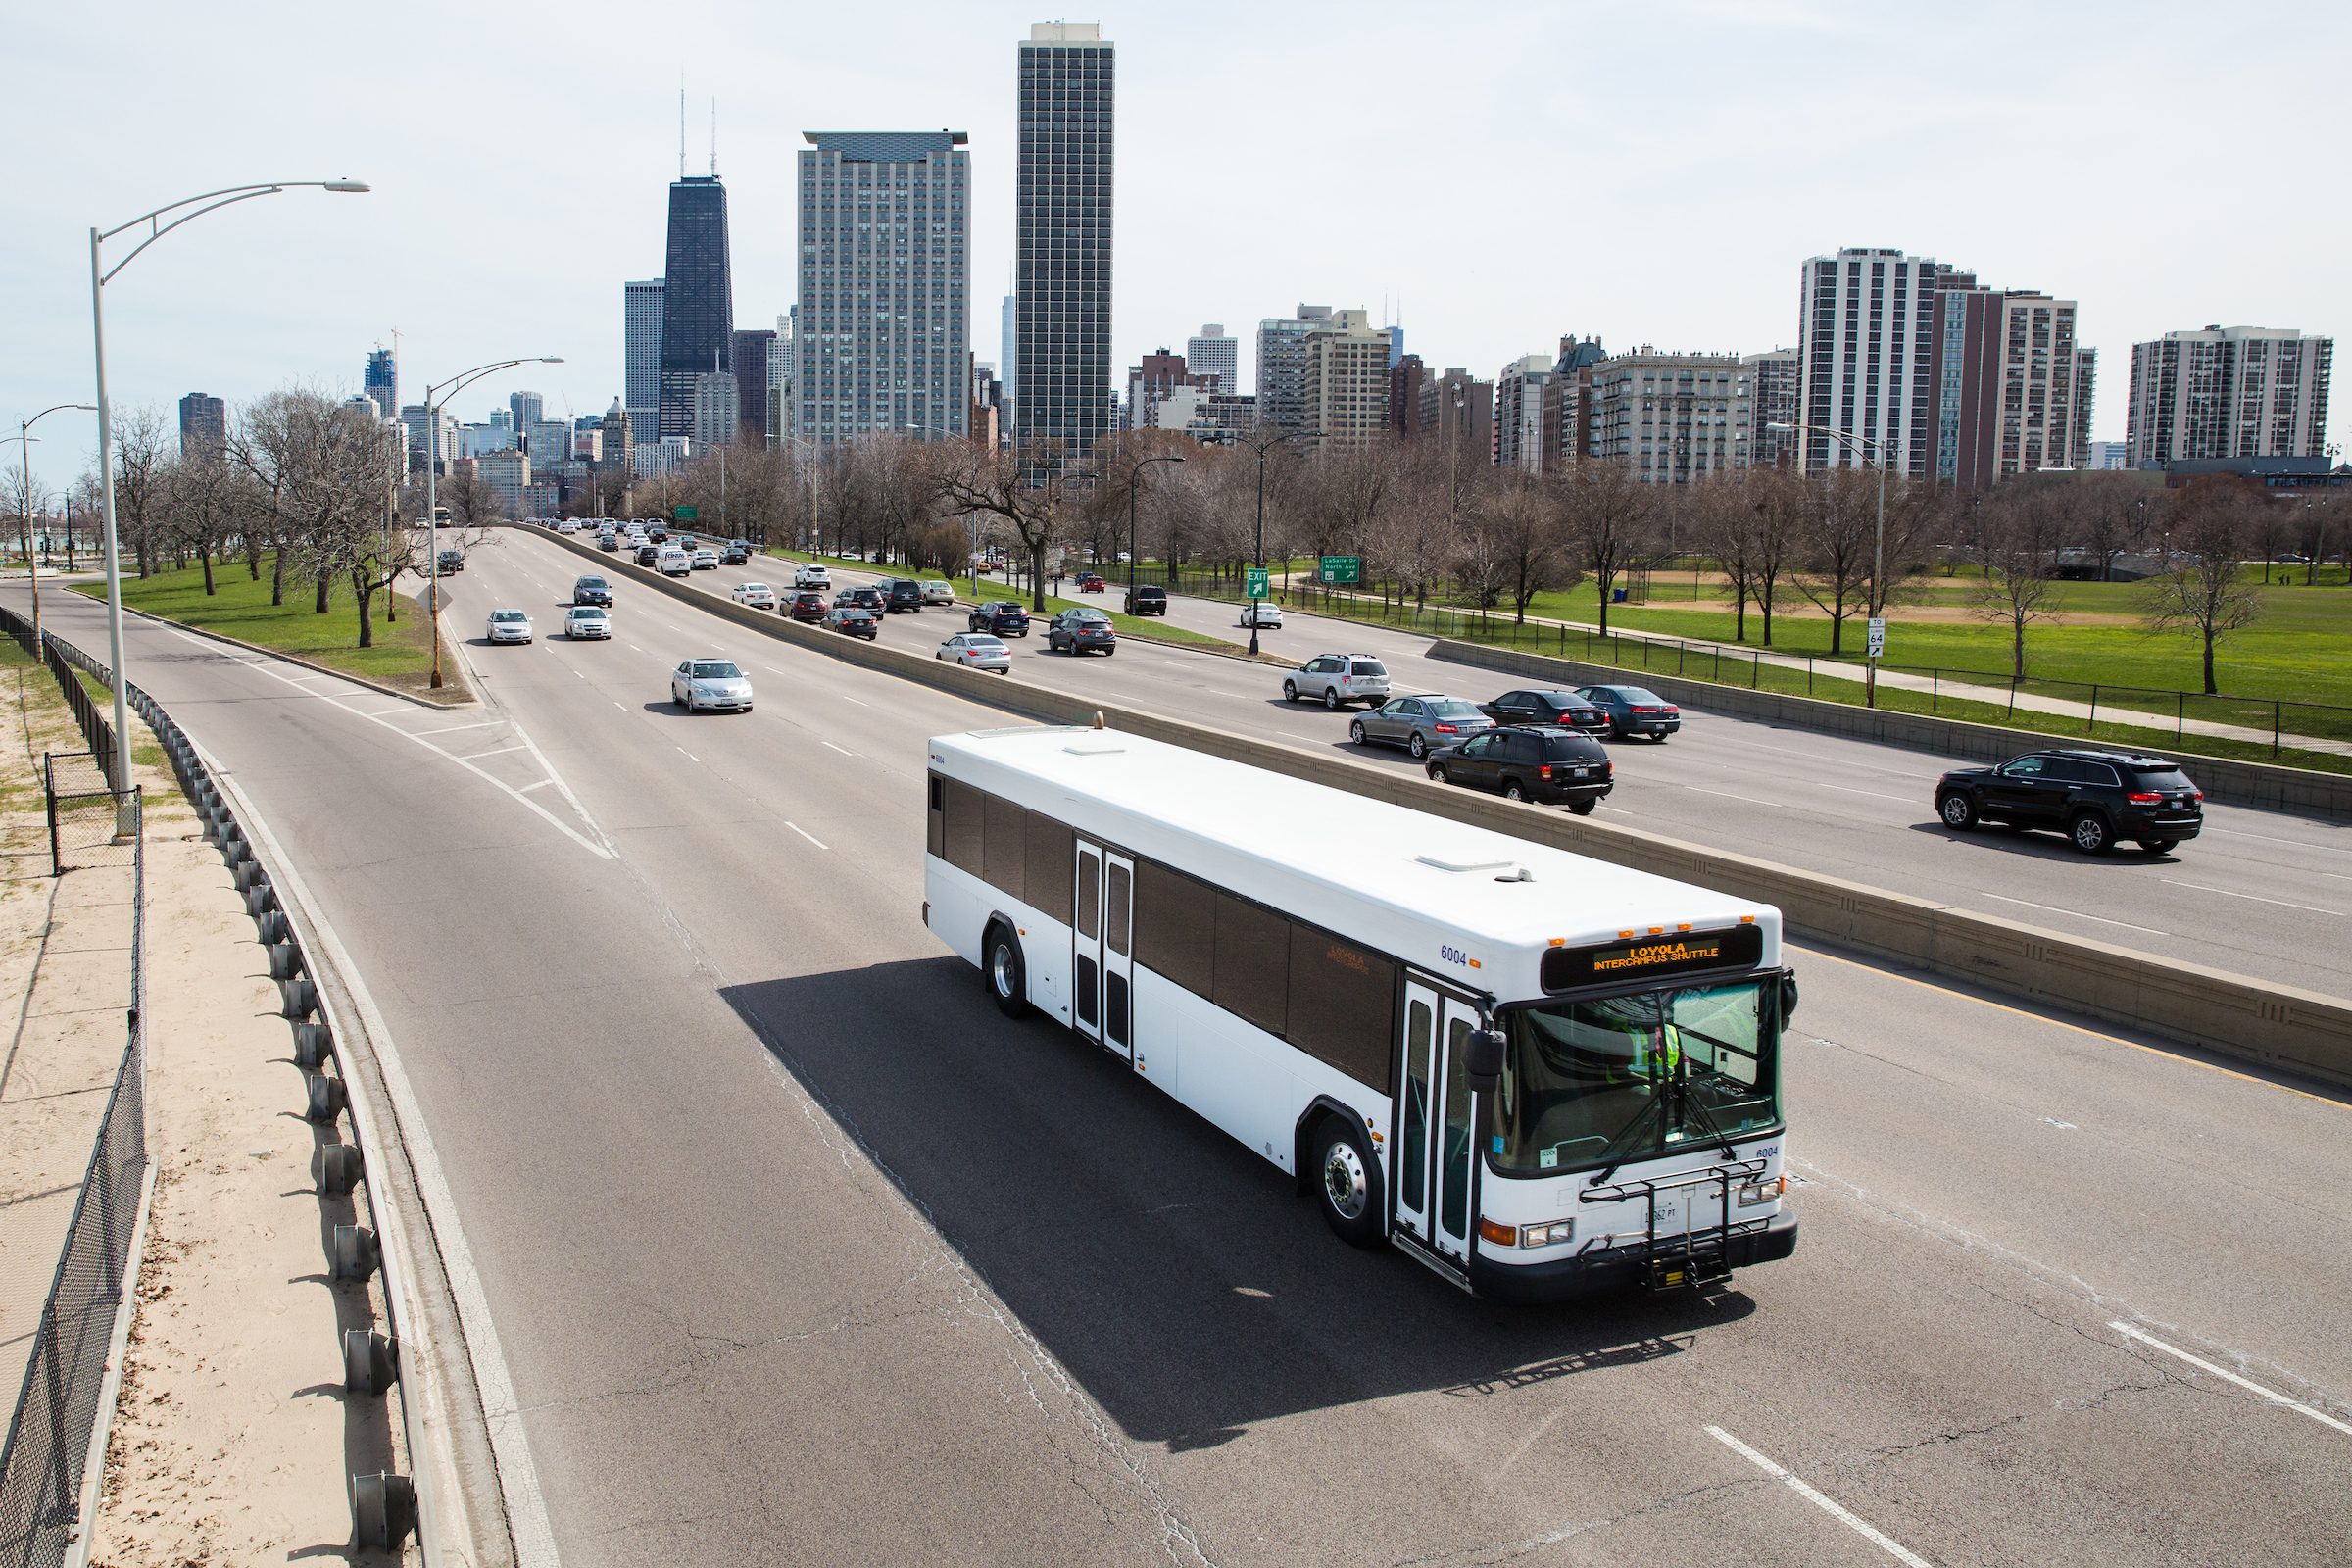 The Loyola Intercampus Shuttle Bus drives along Lake Shore Drive en route from Water Tower Campus to Lake Shore Campus on April 25, 2018. The bus uses biodiesel fuel made from the Searle Biodiesel Lab on the Lake Shore Campus. Part of Sustainability Series. (Photo: Lukas Keapproth)